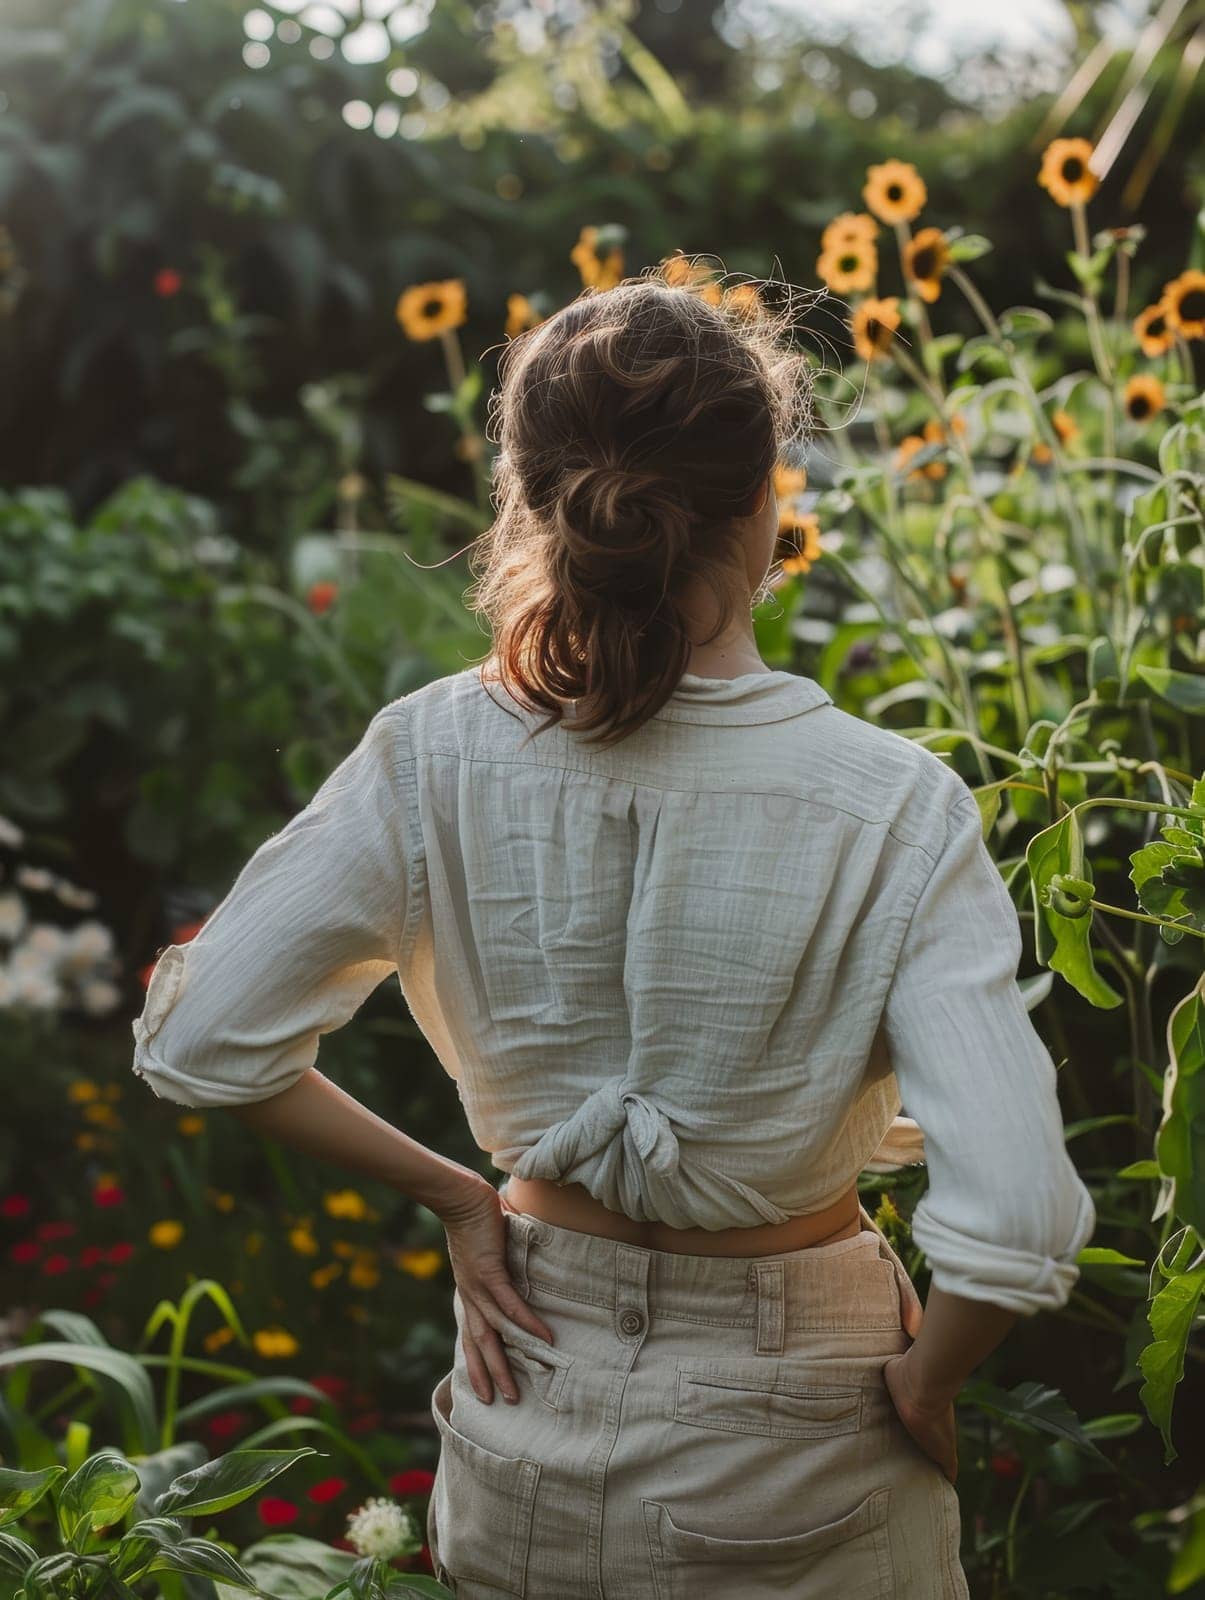 A thoughtful woman stands in a serene garden, her gaze directed away as she contemplates her surroundings. The setting sun illuminates the lush landscape and the bright sunflowers behind her.